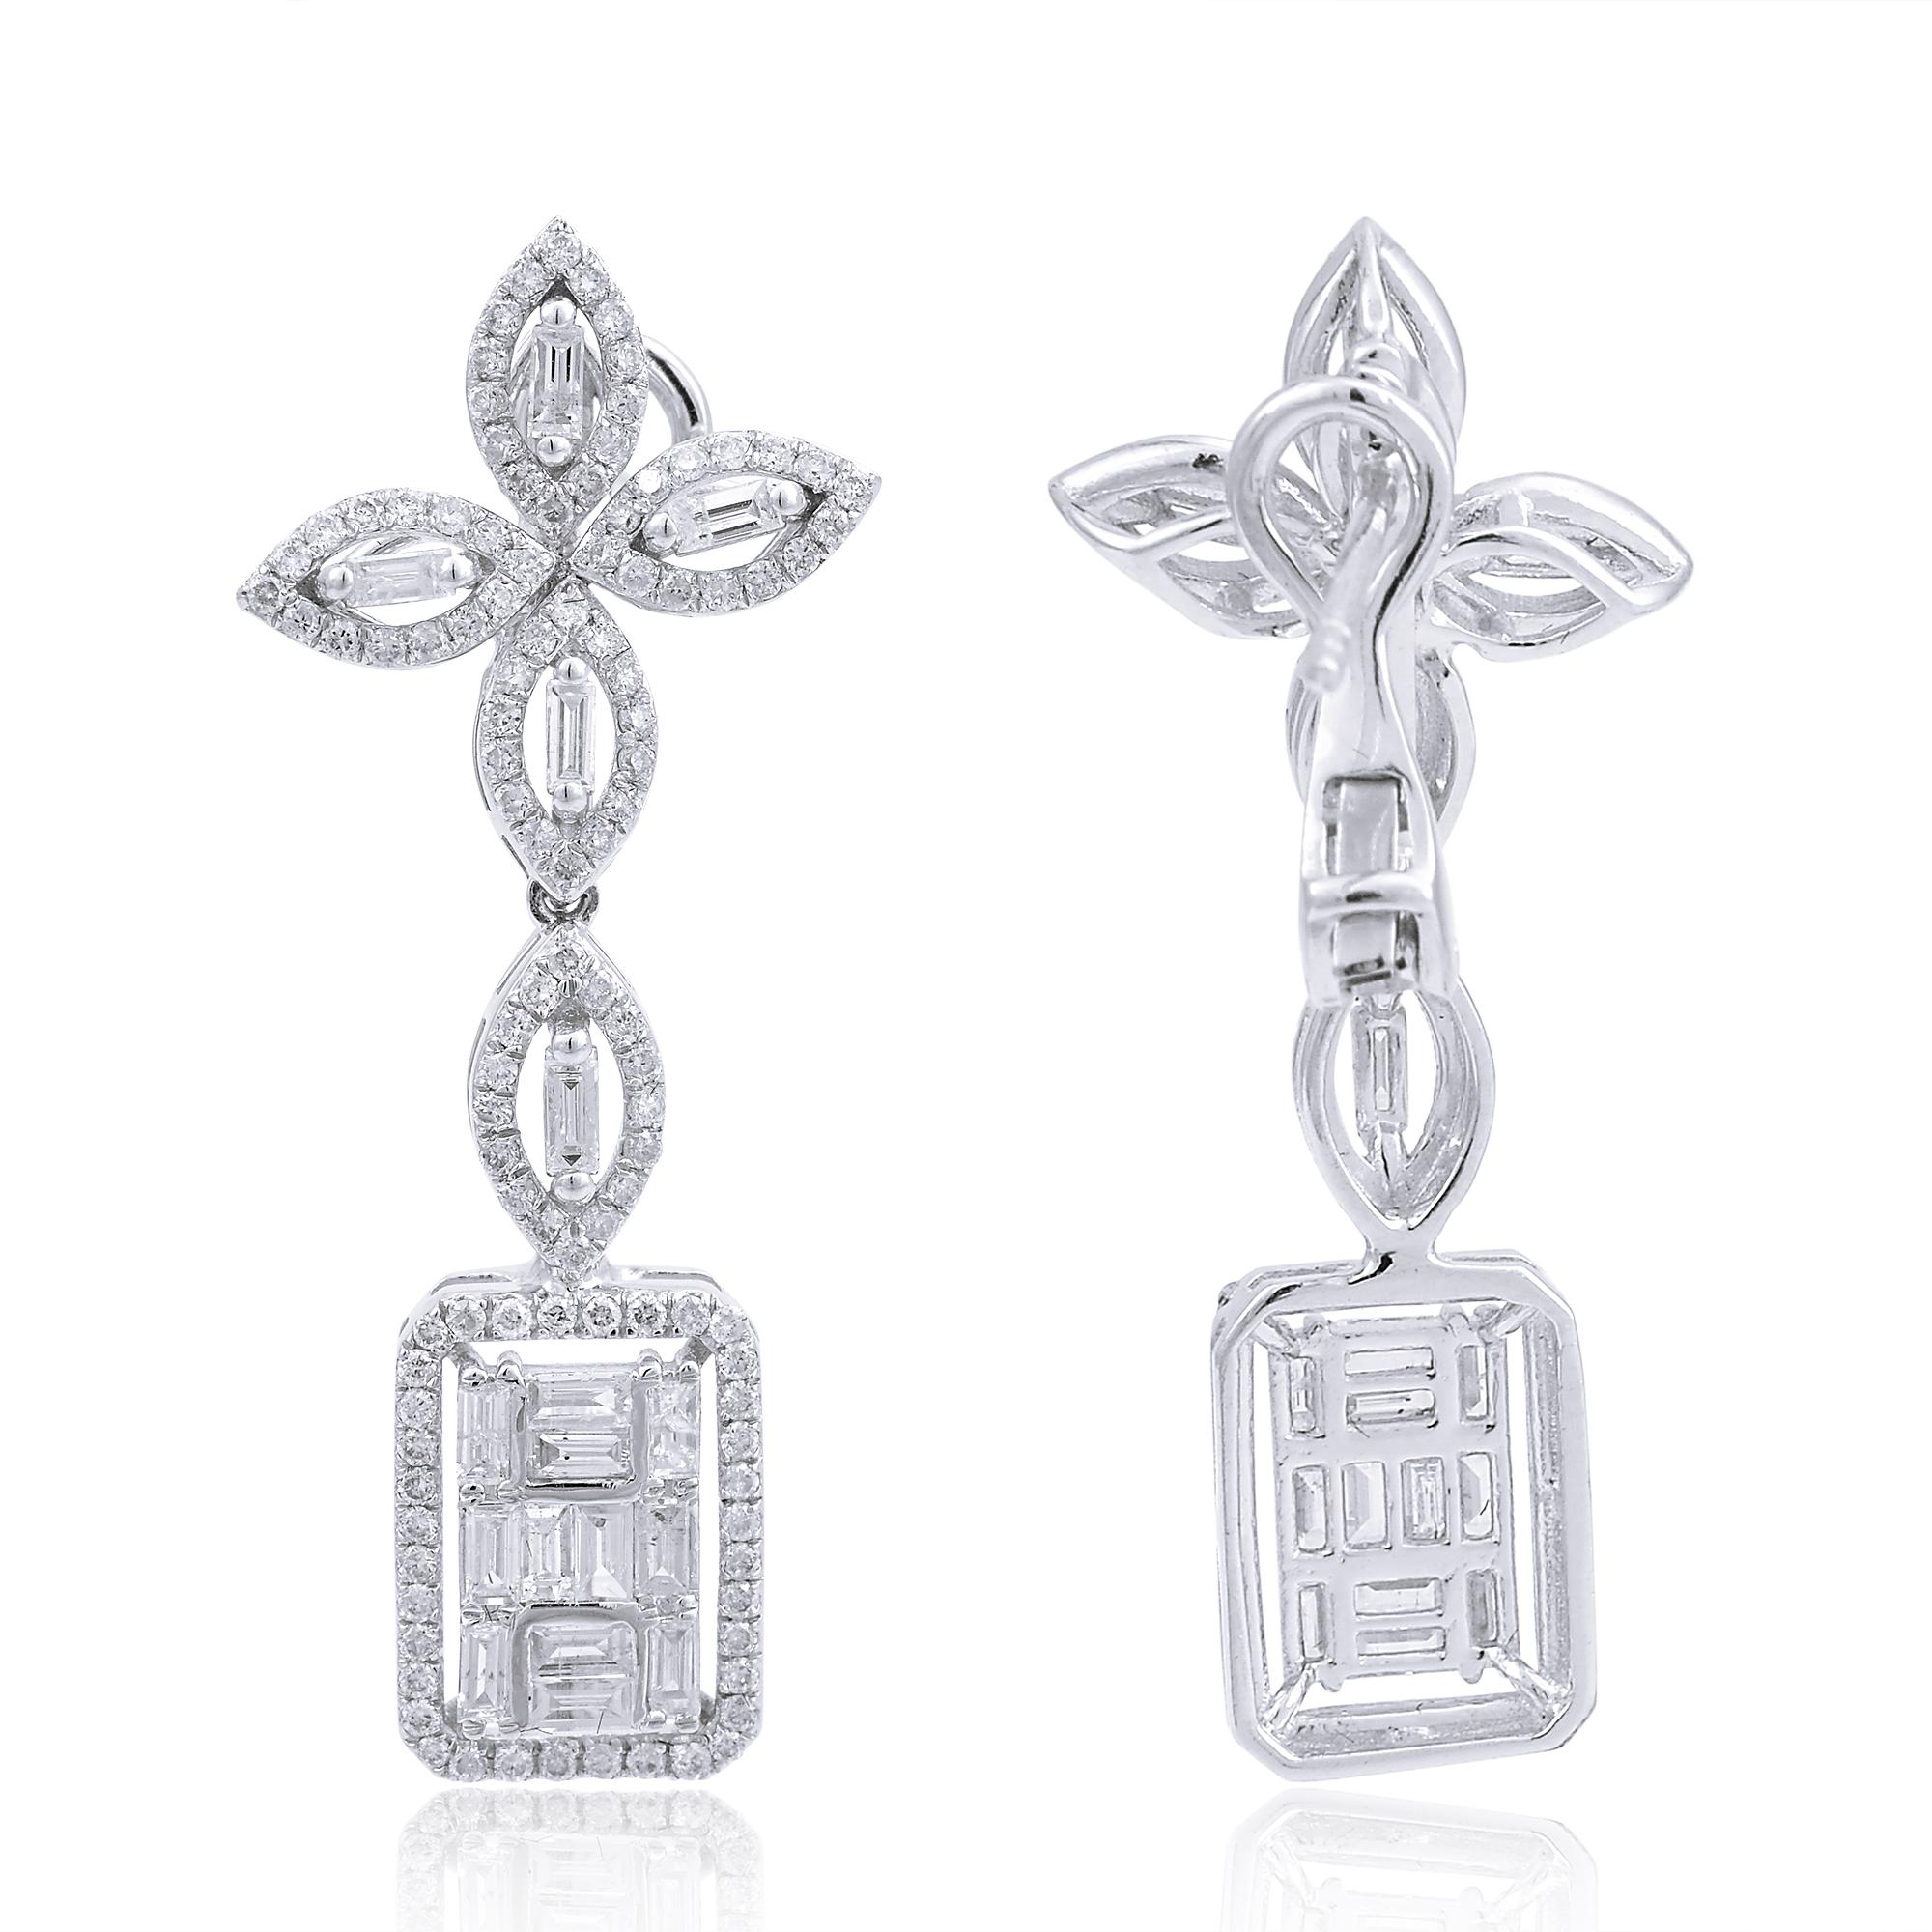 Item Code :- CN-19044
Gross Wt. :- 7.92 gm
18k White Gold Wt. :- 7.57 gm
Natural Diamond Wt. :- 1.75 Ct. ( AVERAGE DIAMOND CLARITY SI1-SI2 & COLOR H-I )
Earrings Size :- 14.68 x 35.60 mm approx.

✦ Sizing
.....................
We can adjust most